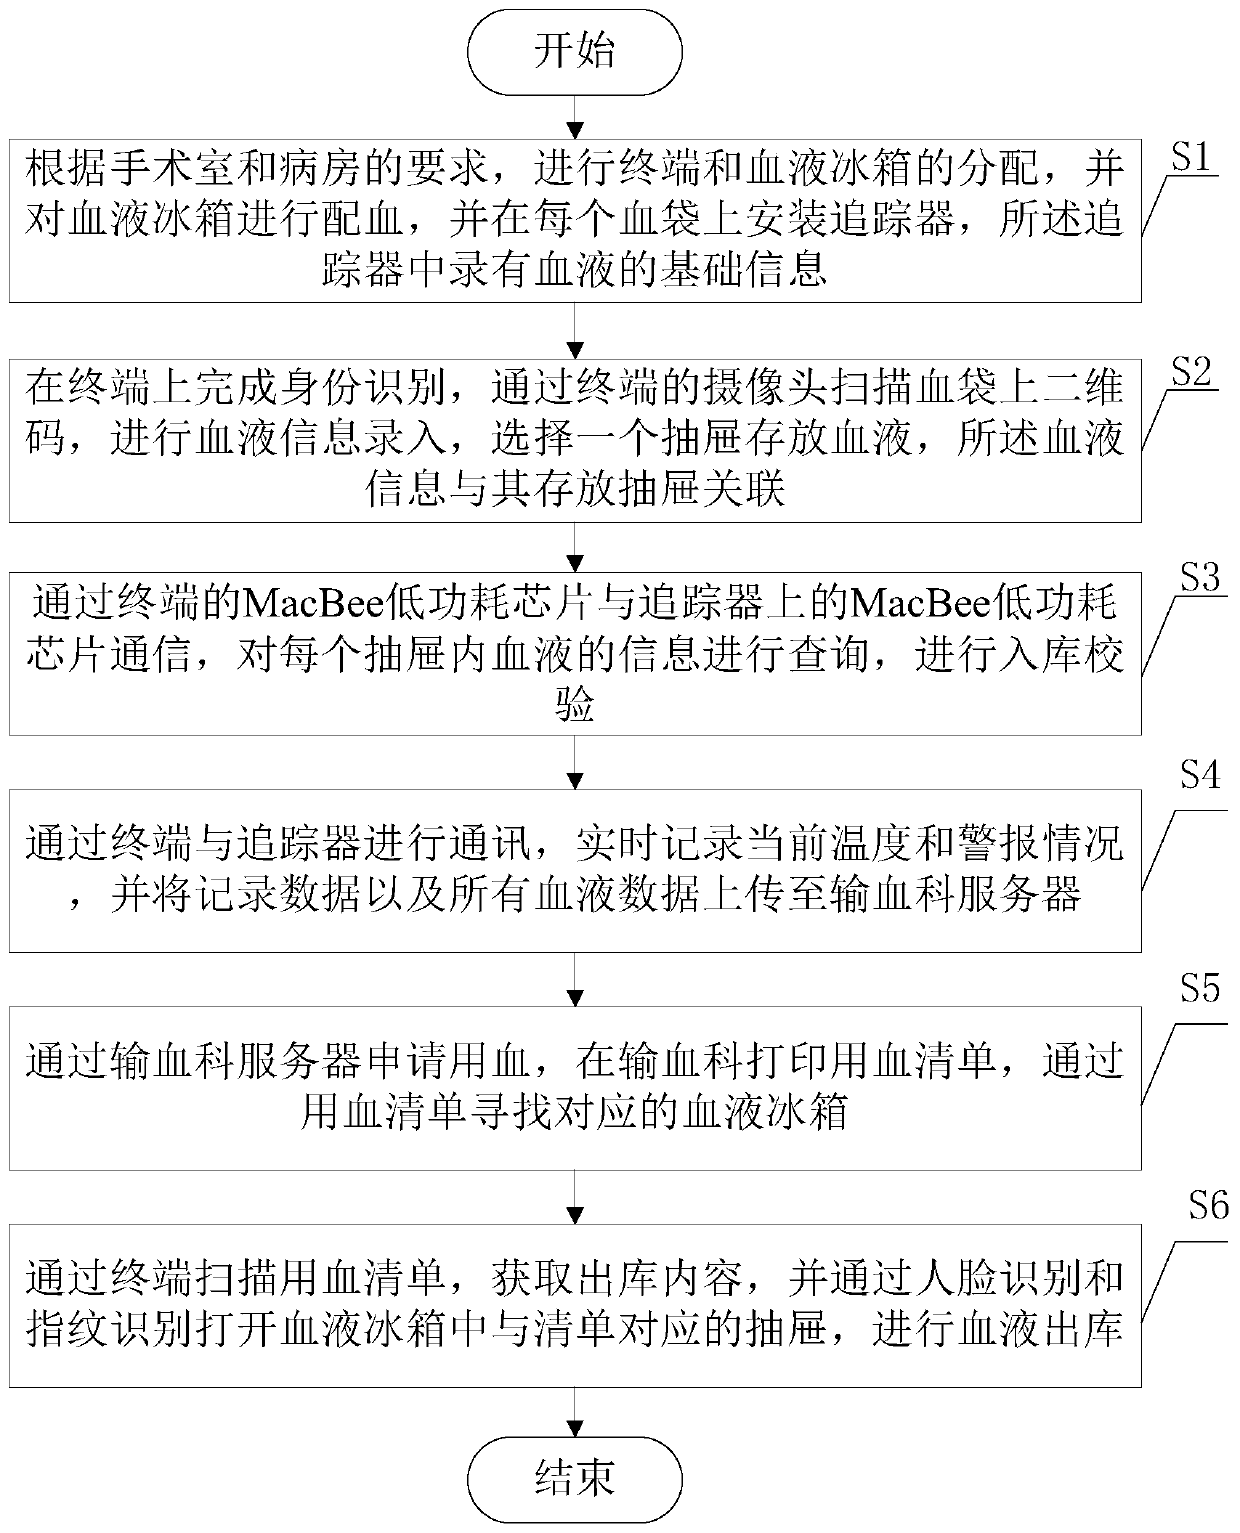 Blood management system and method based on MacBee low-power-consumption communication technology